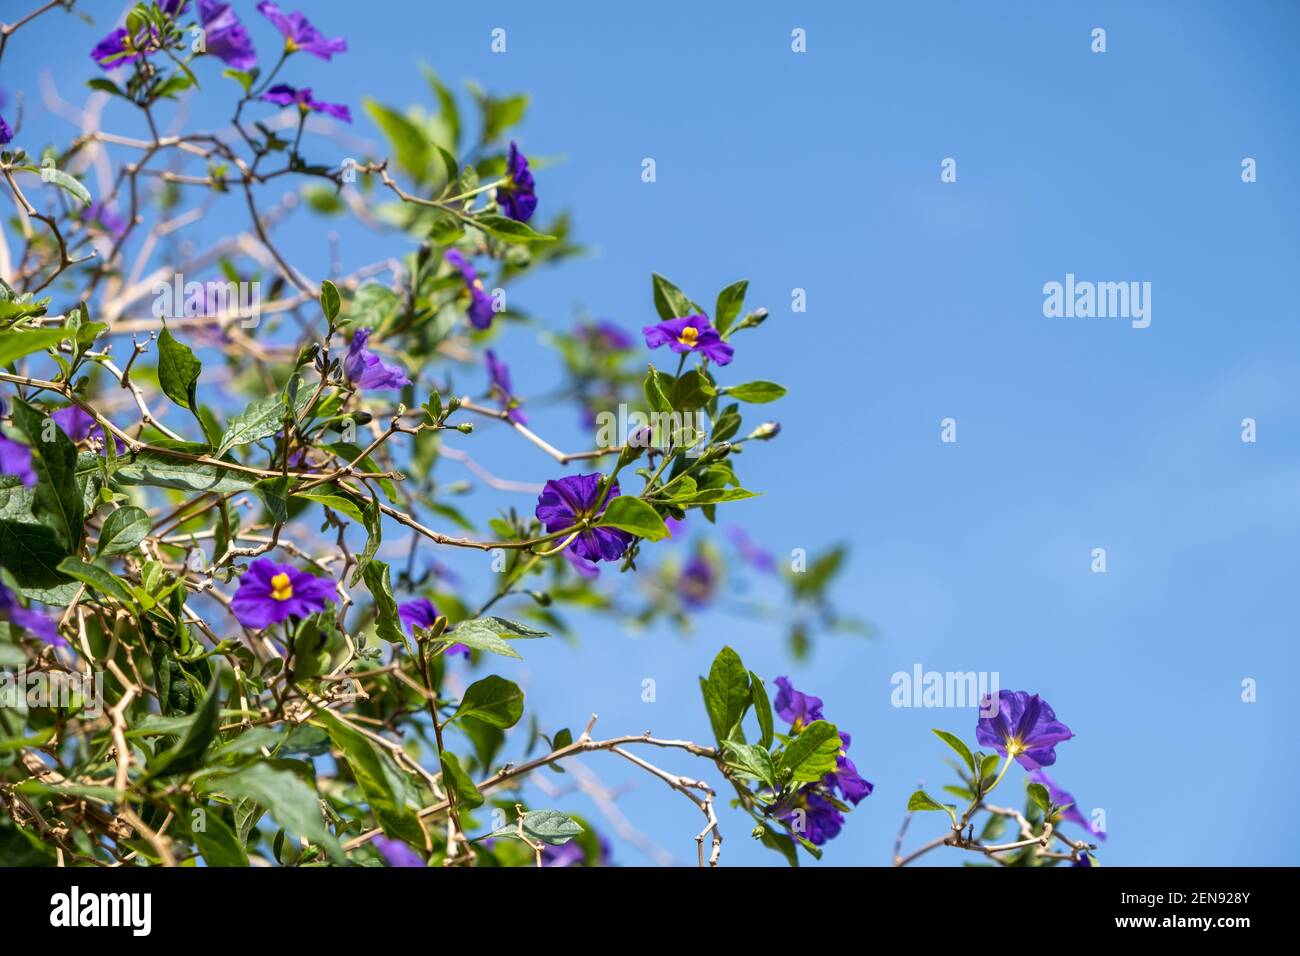 Lycianthes Rantonnetii, Blue Potato Bush, Paraguay Nightshade flowering plant background. Toxic, poisonous shrub with bright blue purple flowers with Stock Photo